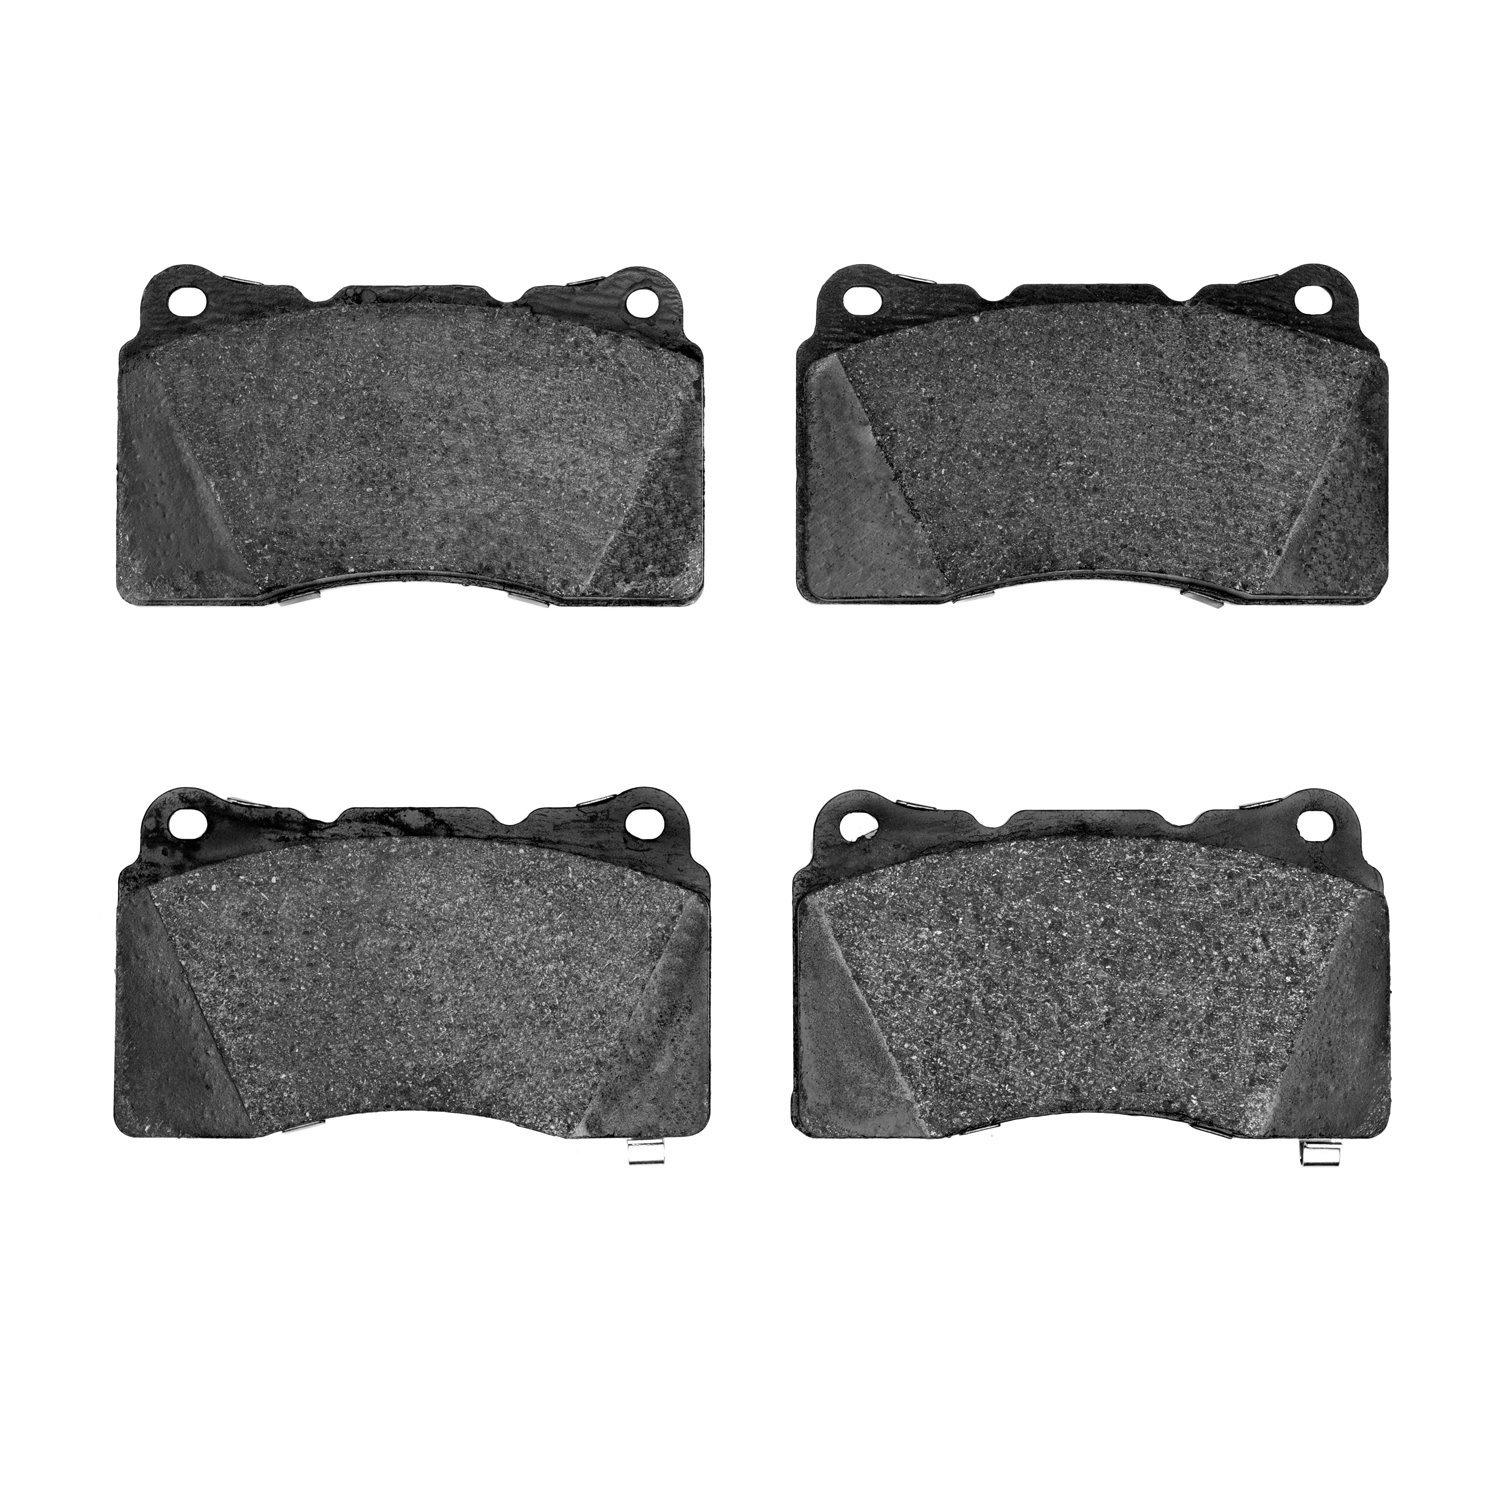 1552-1001-00 5000 Advanced Low-Metallic Brake Pads, 2004-2021 Multiple Makes/Models, Position: Rear,Front